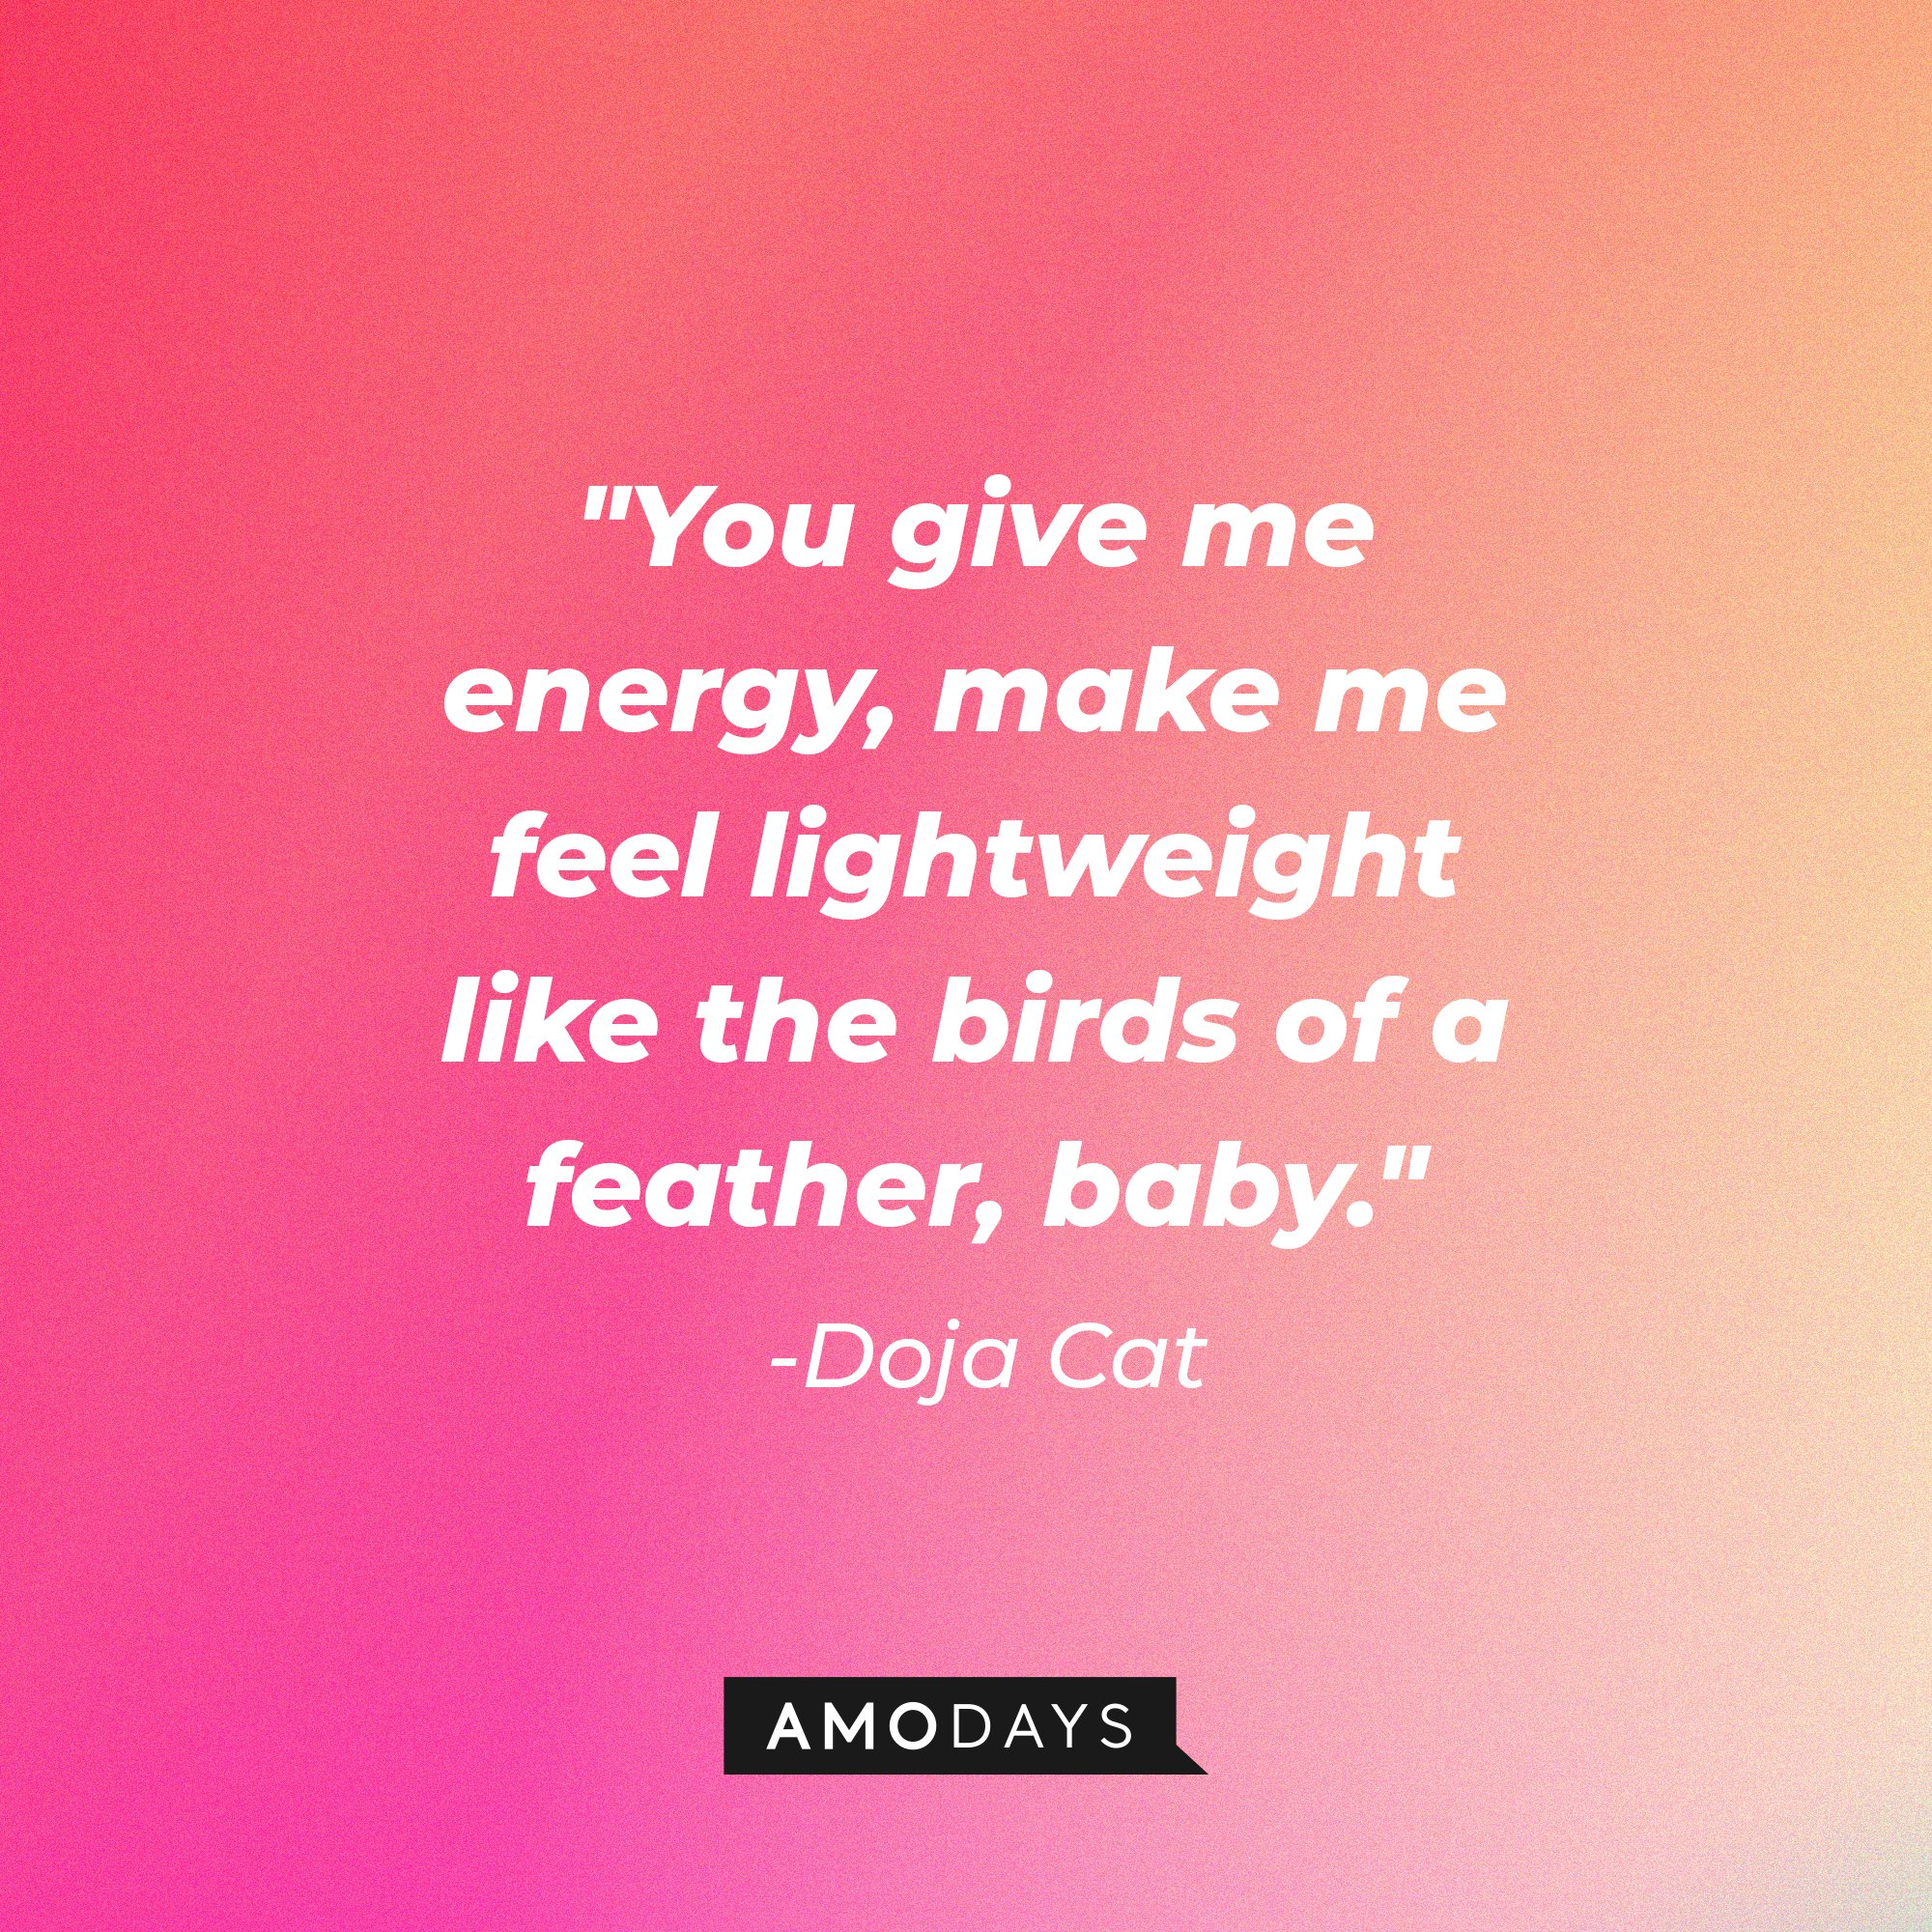 Doja Cat's quote: "You give me energy, make me feel lightweight like the birds of a feather, baby." | Image: AmoDays